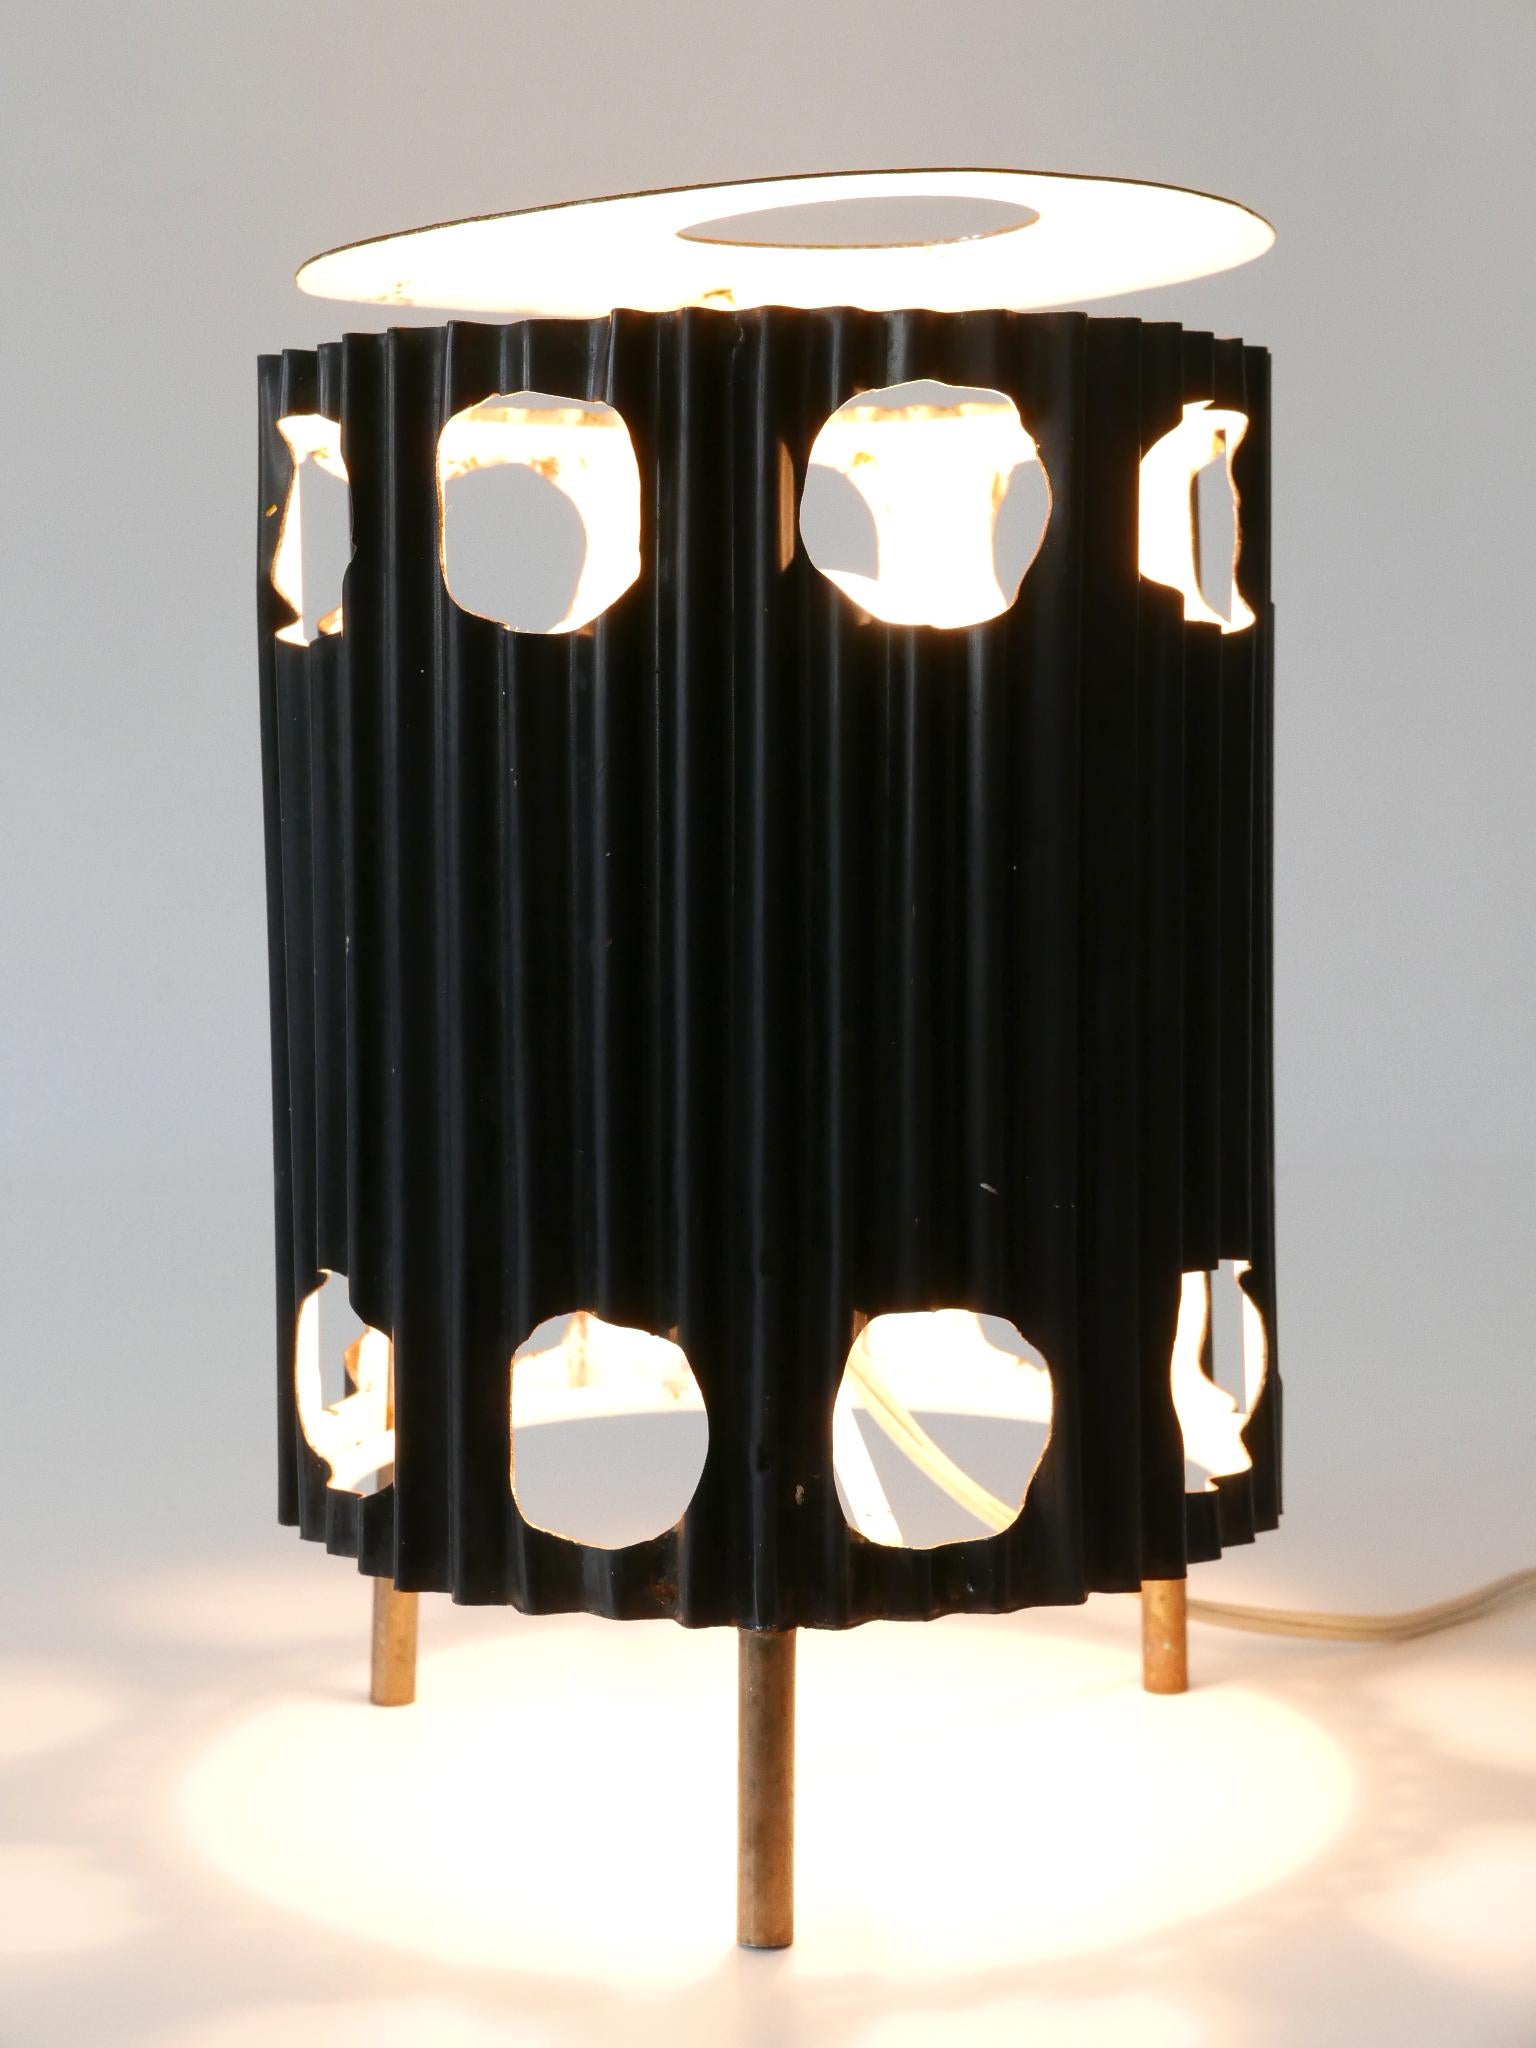 Extremely Rare Mid-Century Modern Table Lamp 'Java' by Mathieu Matégot 1950s For Sale 4